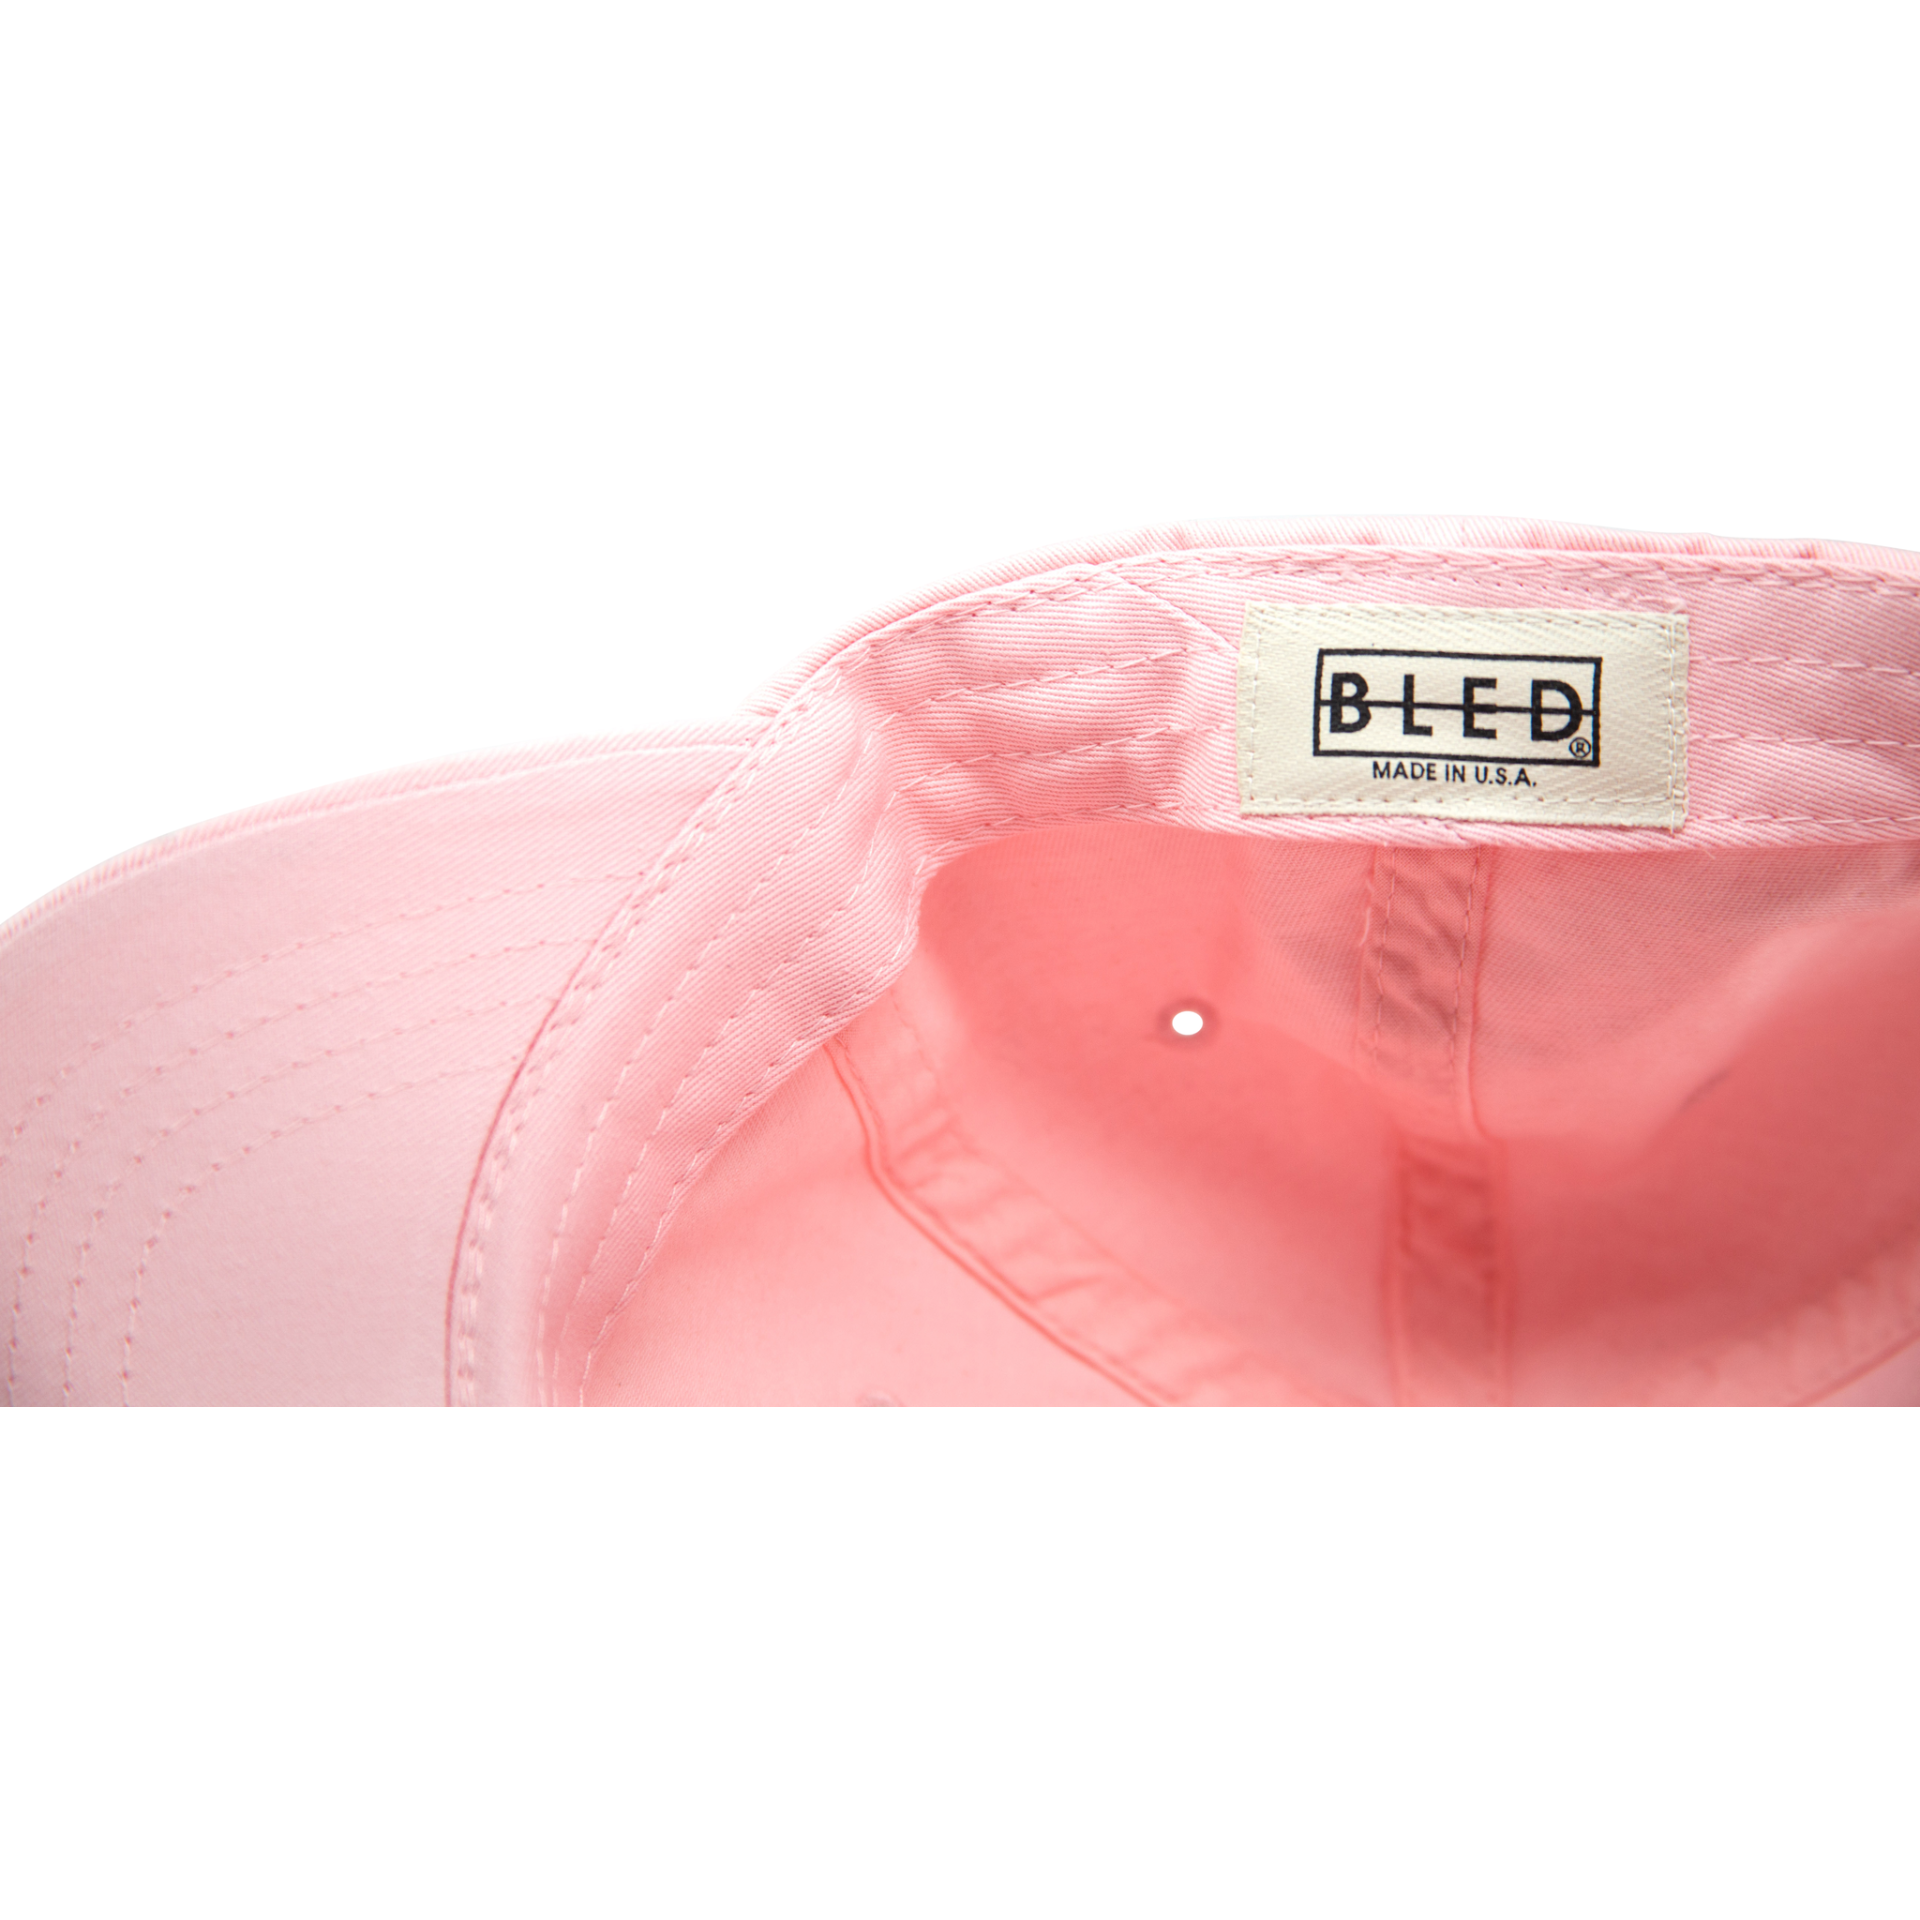 6-panel unconstructed 100% Cotton pink dad hat featuring evil eye embroidery on the front and Bled logo embroidered on the back. Third Eye Hat